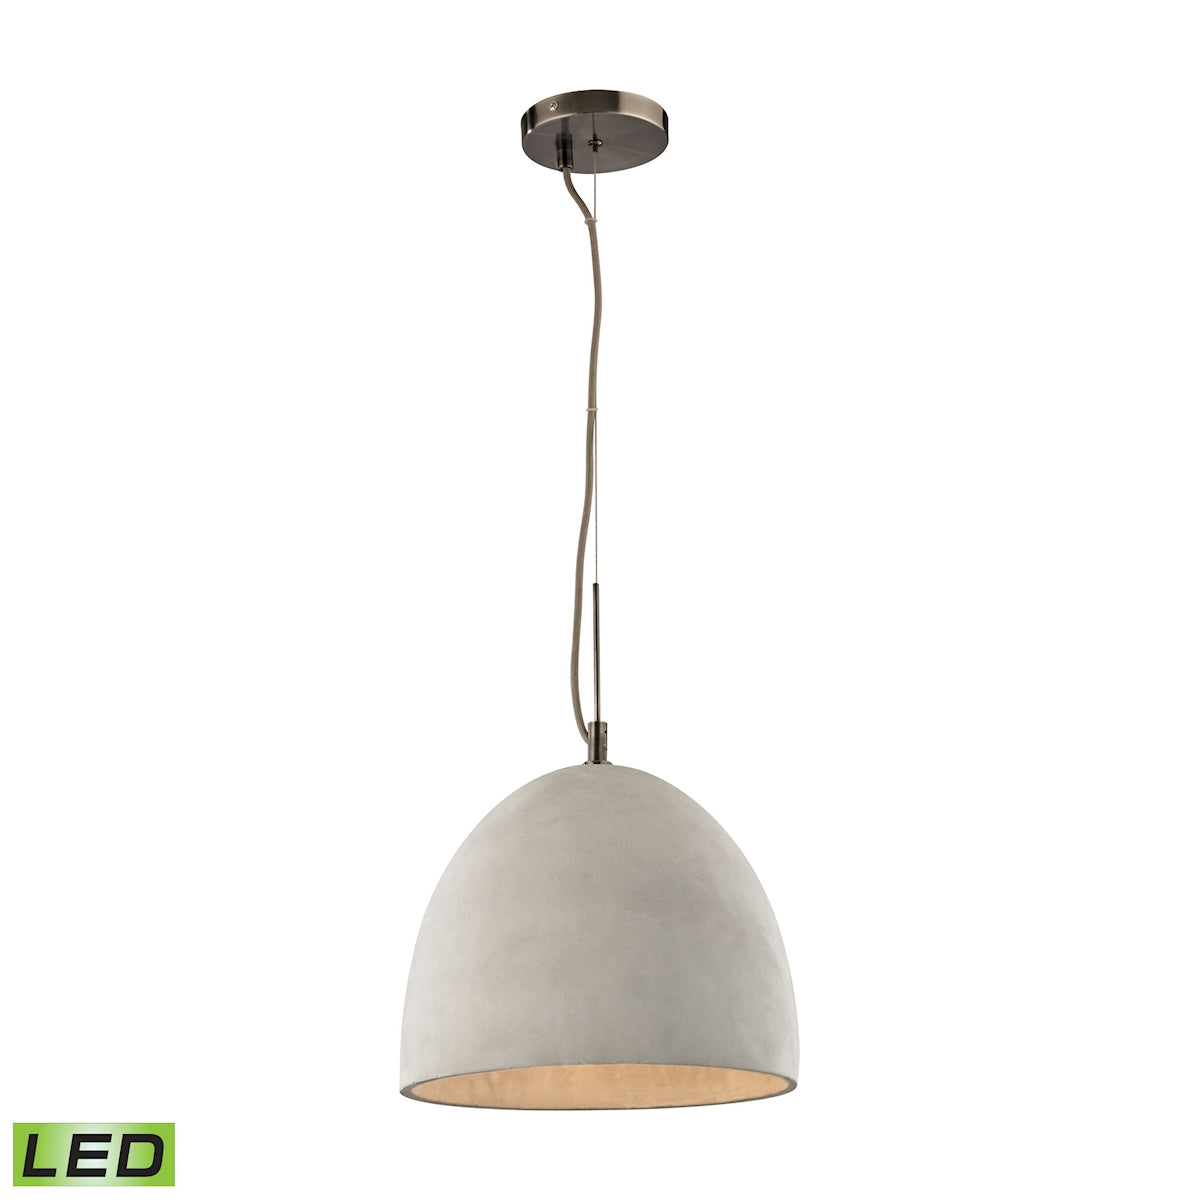 ELK Lighting 45334/1-LED Urban Form 1-Light Mini Pendant in Black Nickel with Natural Concrete Shade - Includes LED Bulb